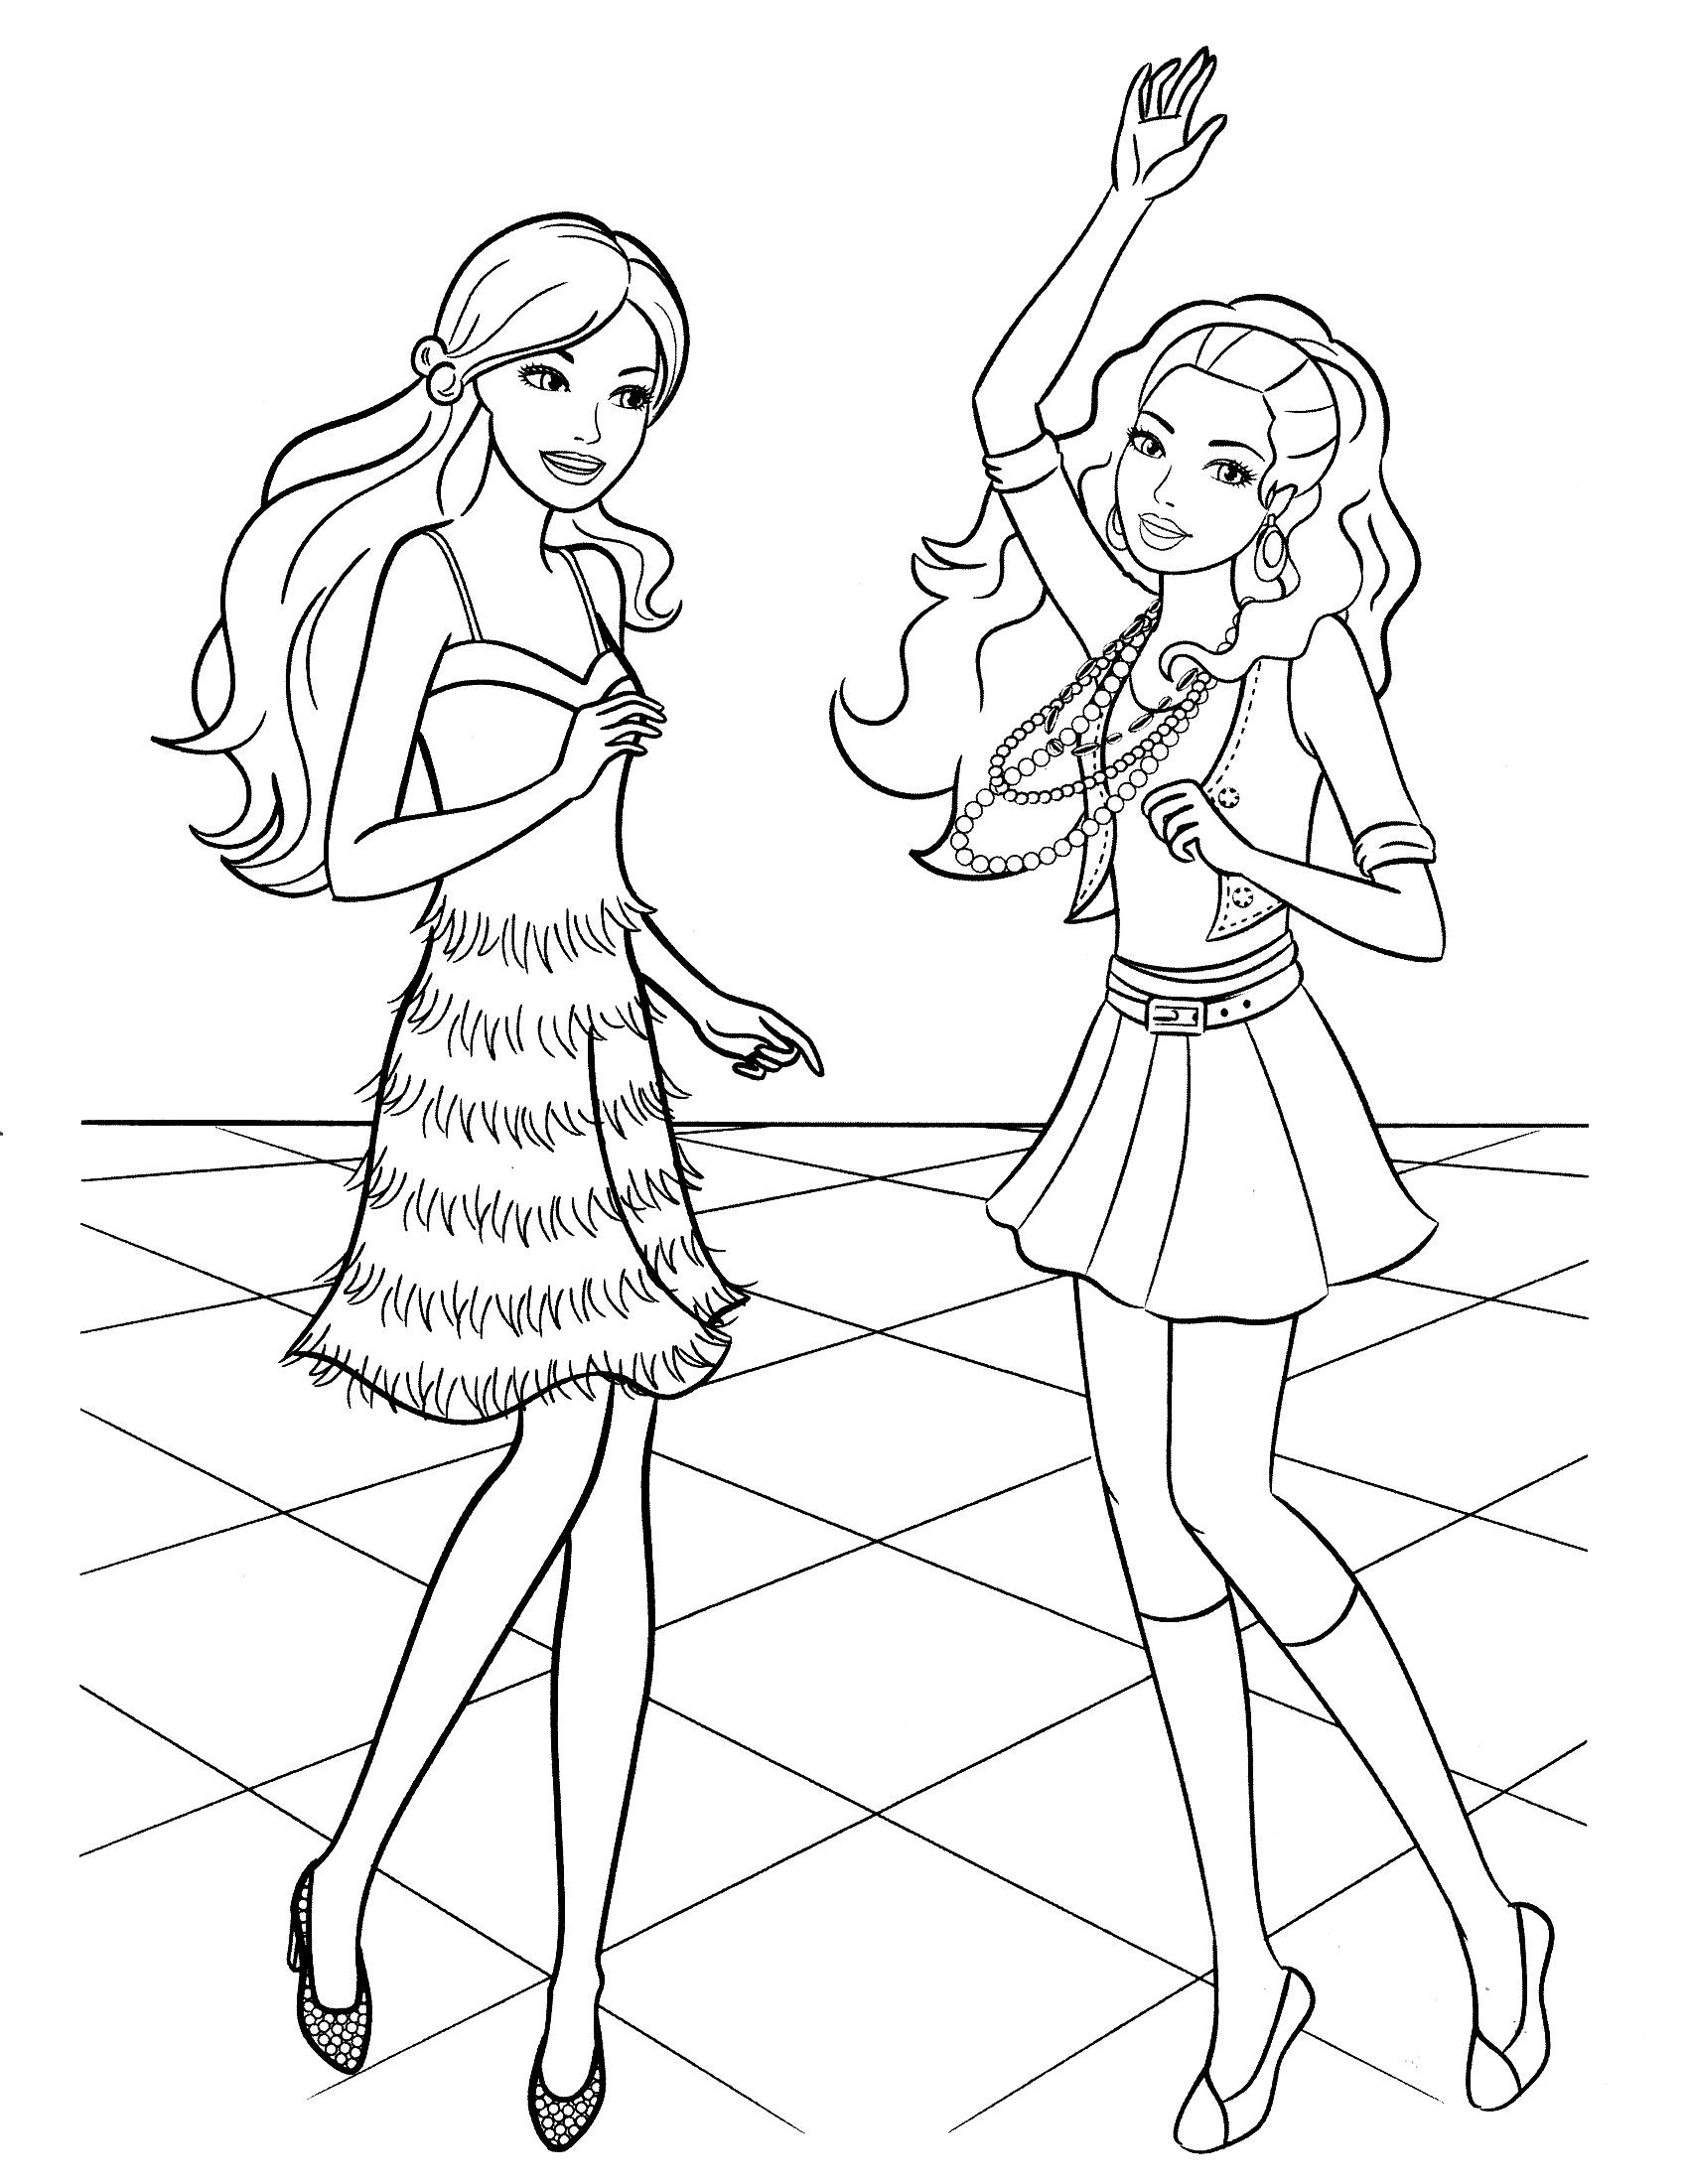 Printable Barbie And Friends Coloring Pages Pdf - Barbie And Friends Coloring Sheets